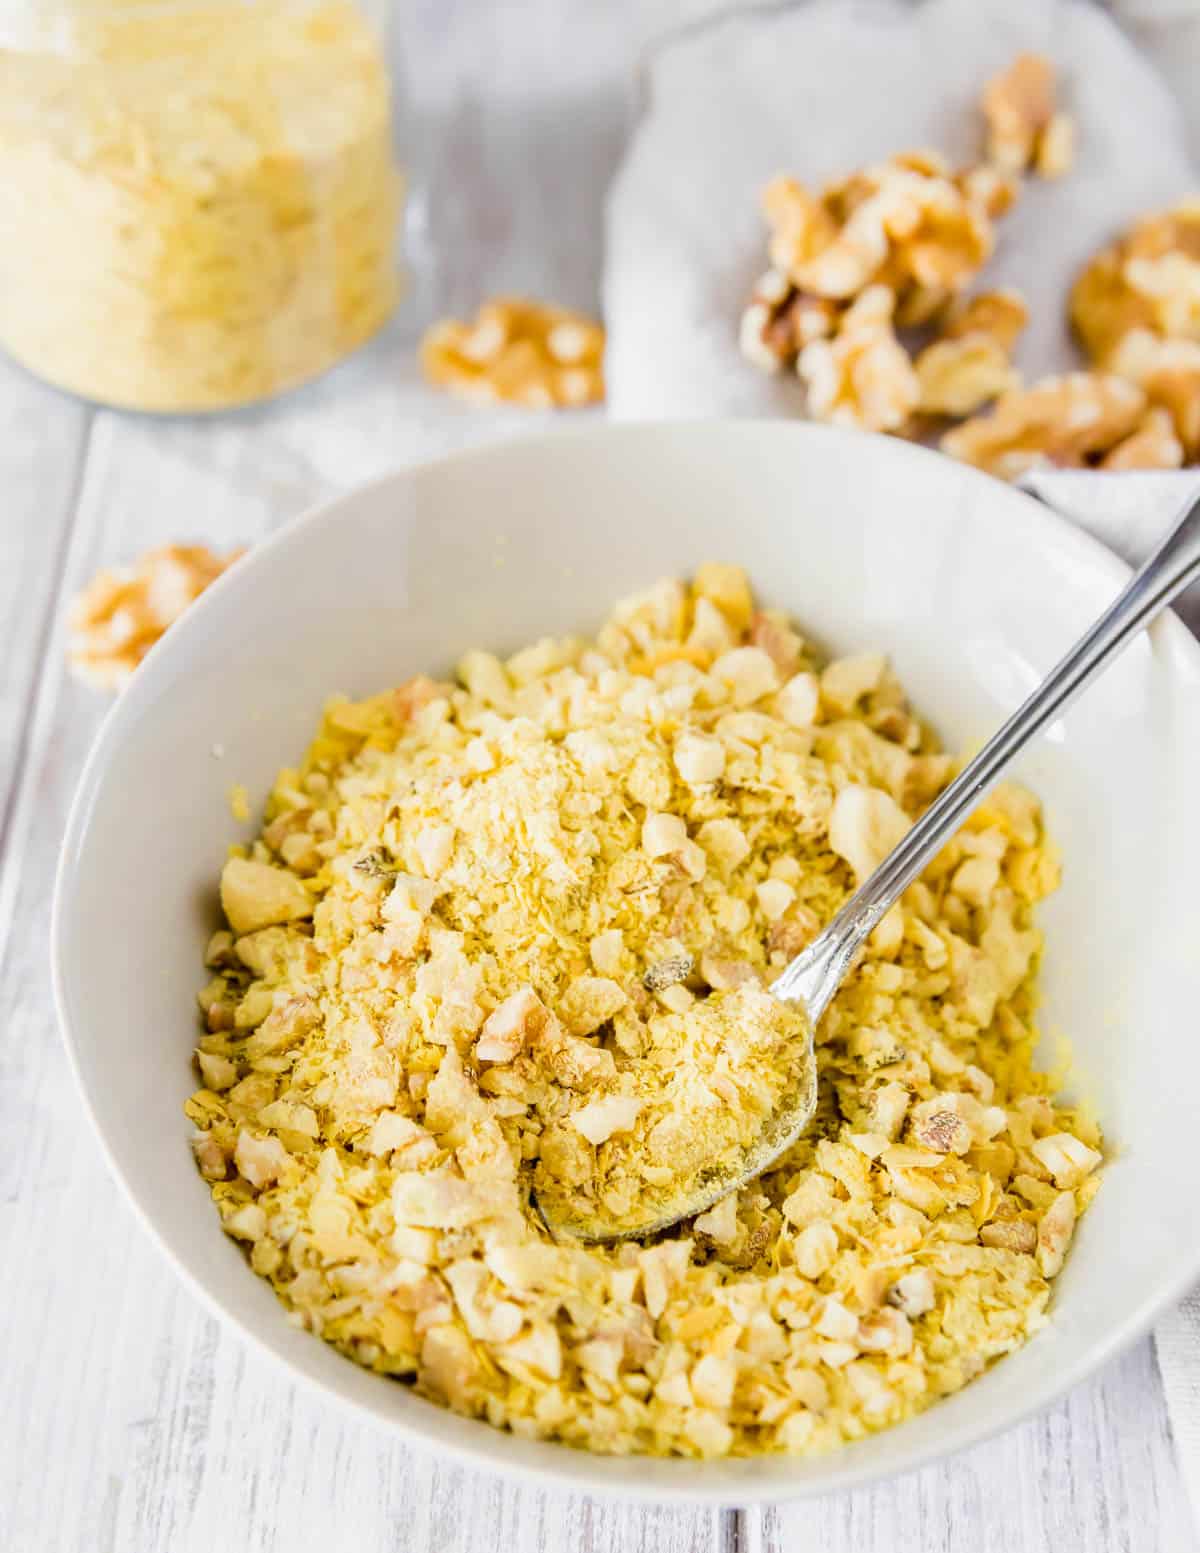 Chopped walnuts and nutritional yeast make a "cheesy" vegan topping for this red lentil pasta recipe.